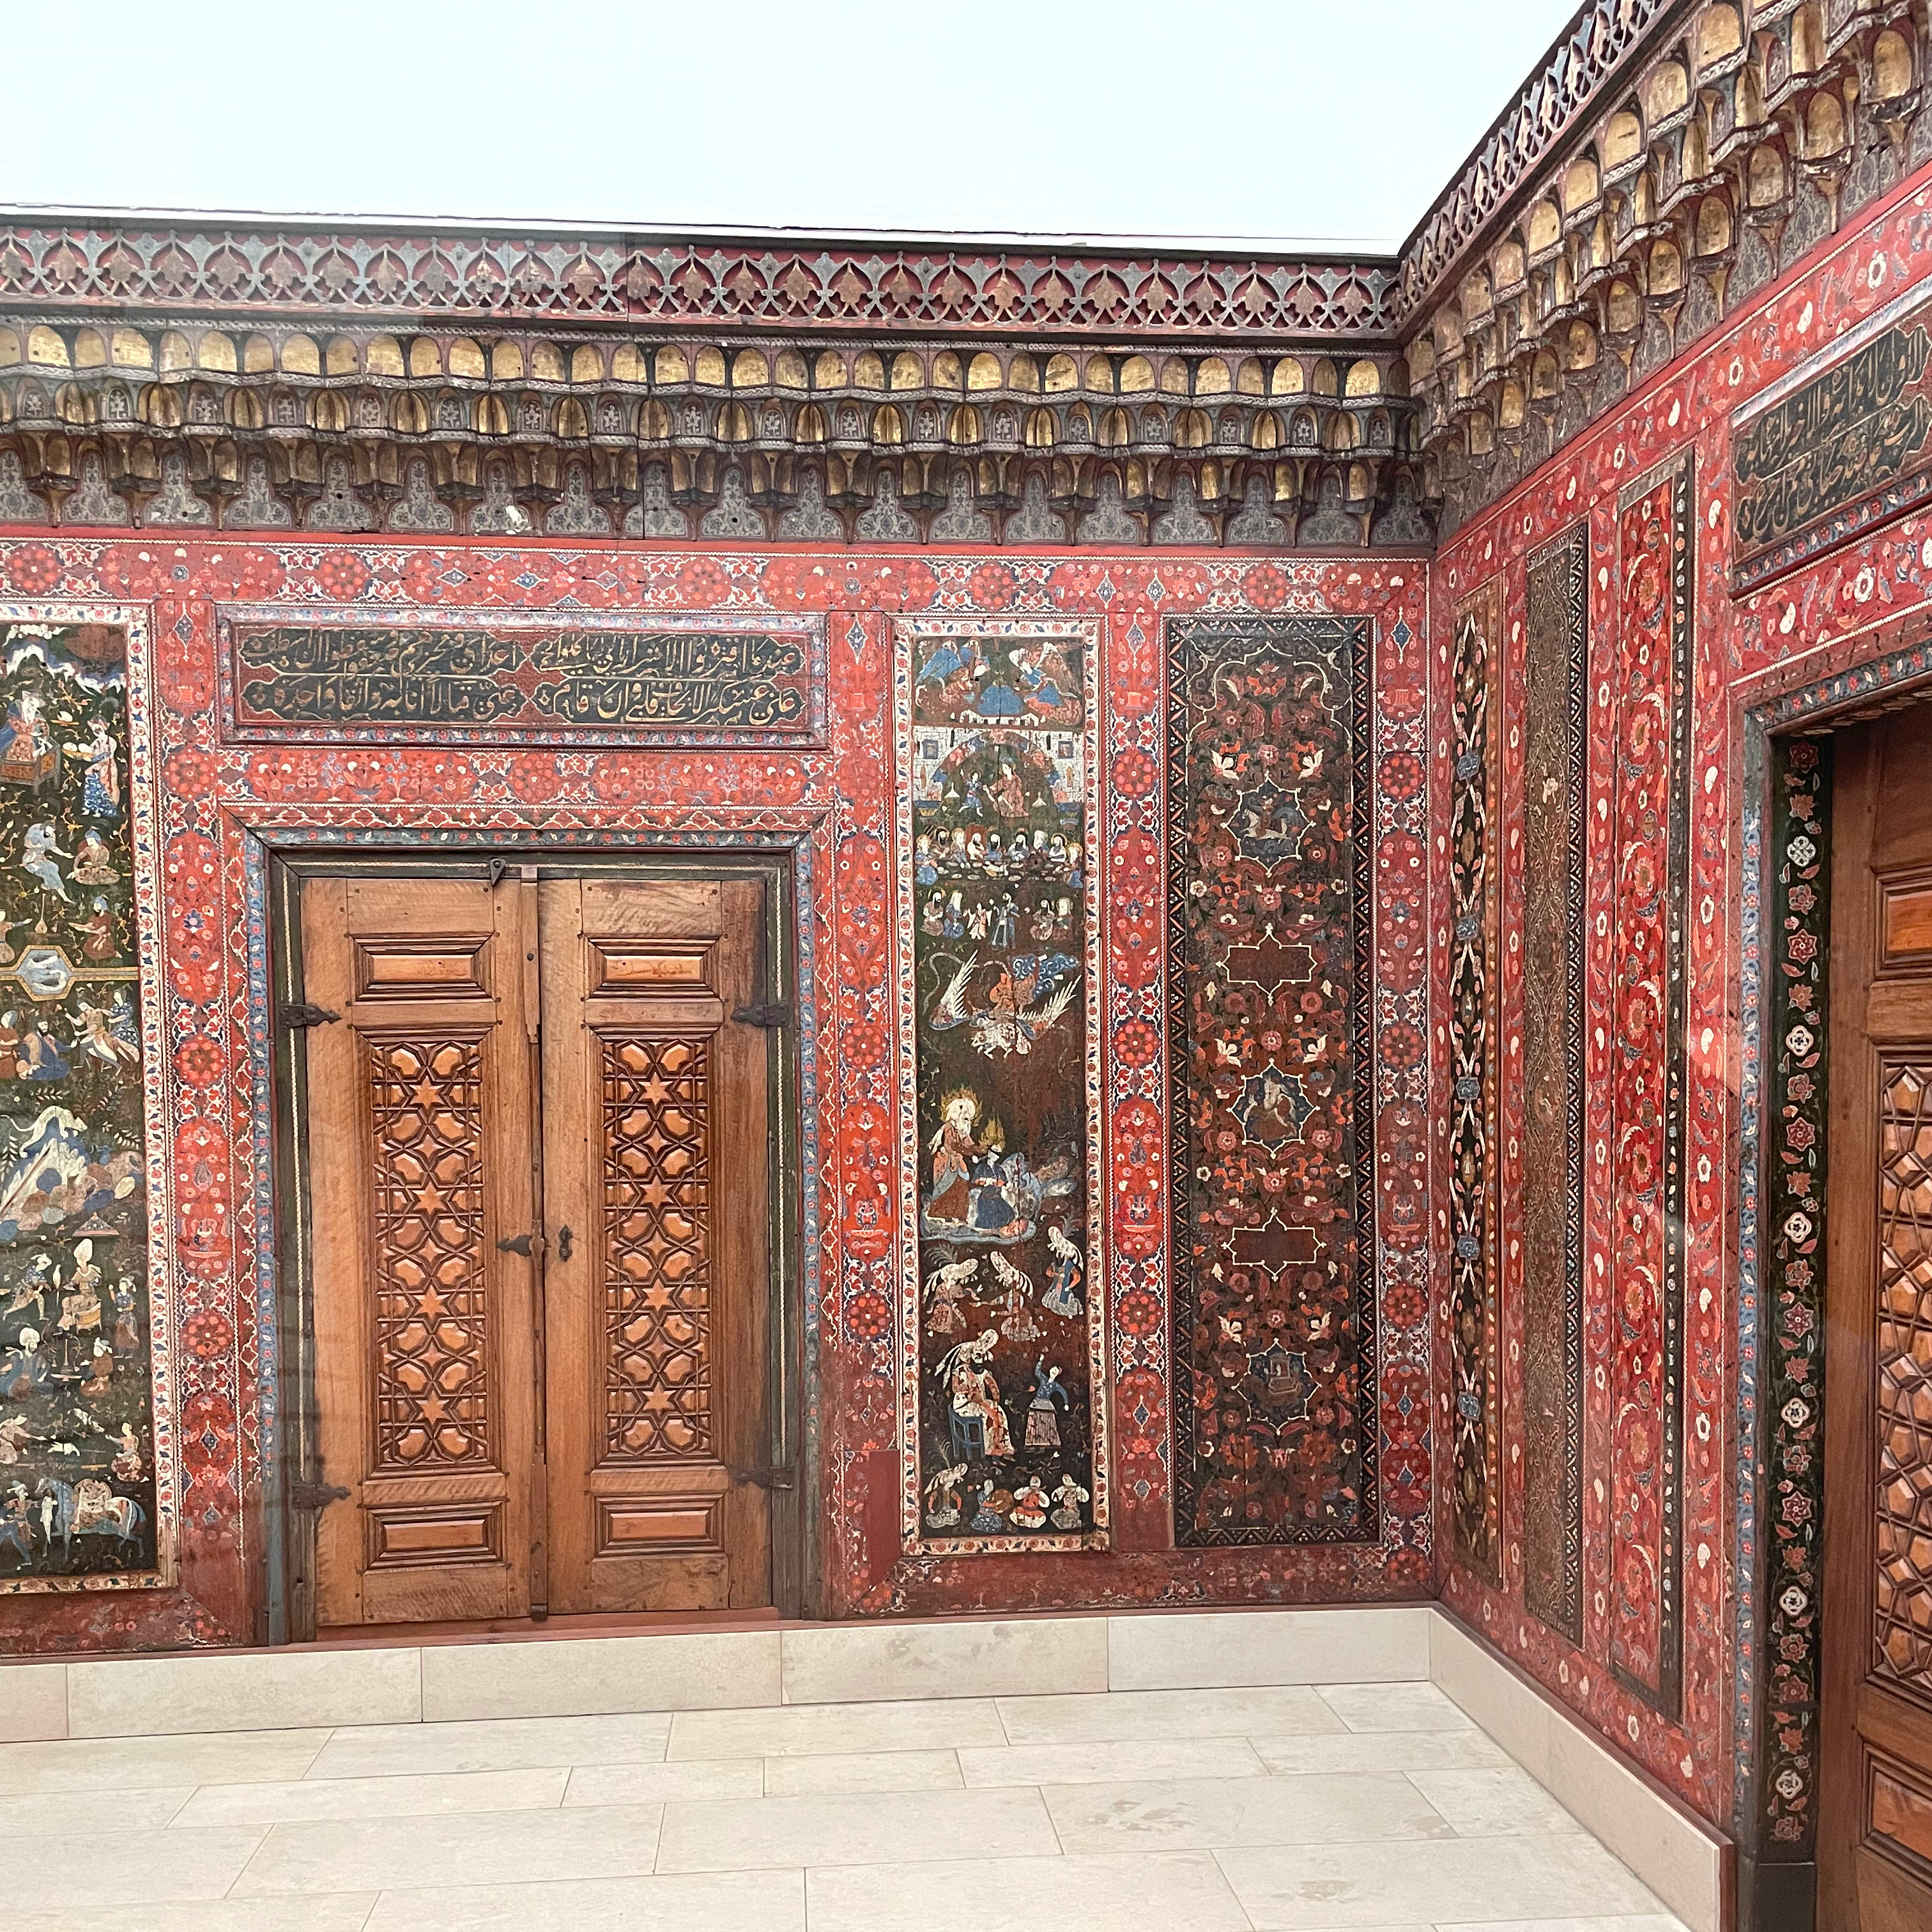 The intricate details on the wood panels were beautiful, and demonstrated the wealth of the merchant who commissioned their creation.